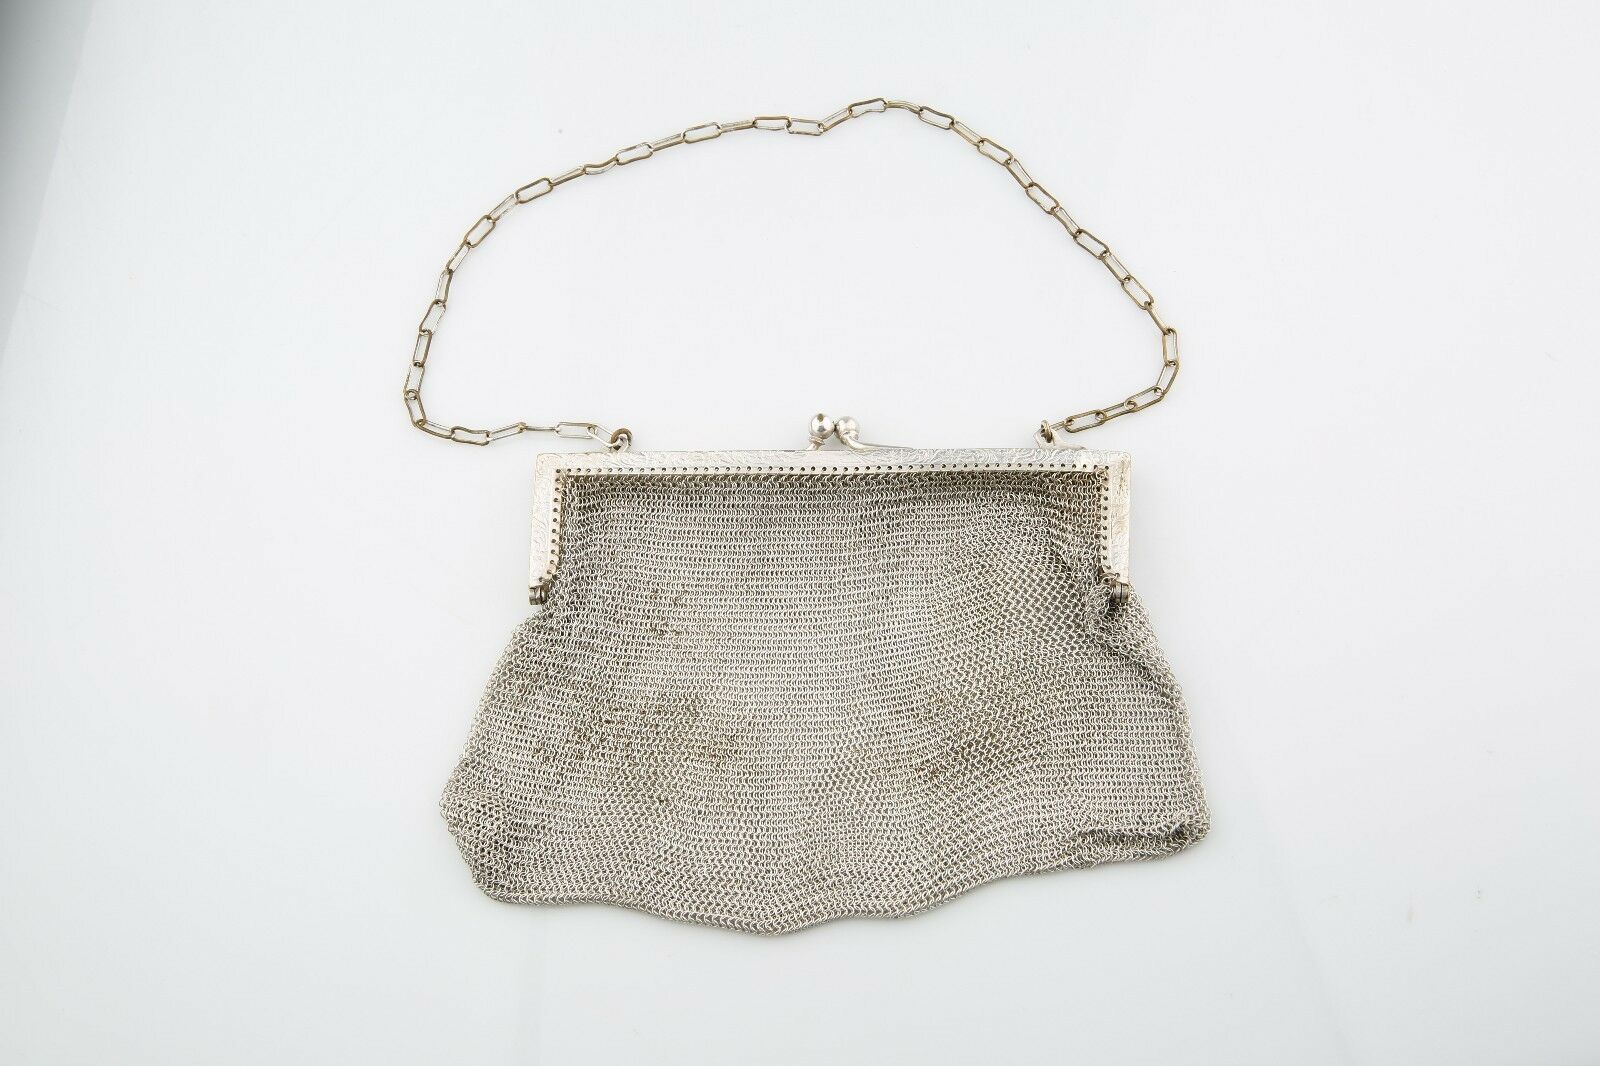 Antique Metal German Silver Purse at Rs 1111/piece in Jaipur | ID:  22232848655